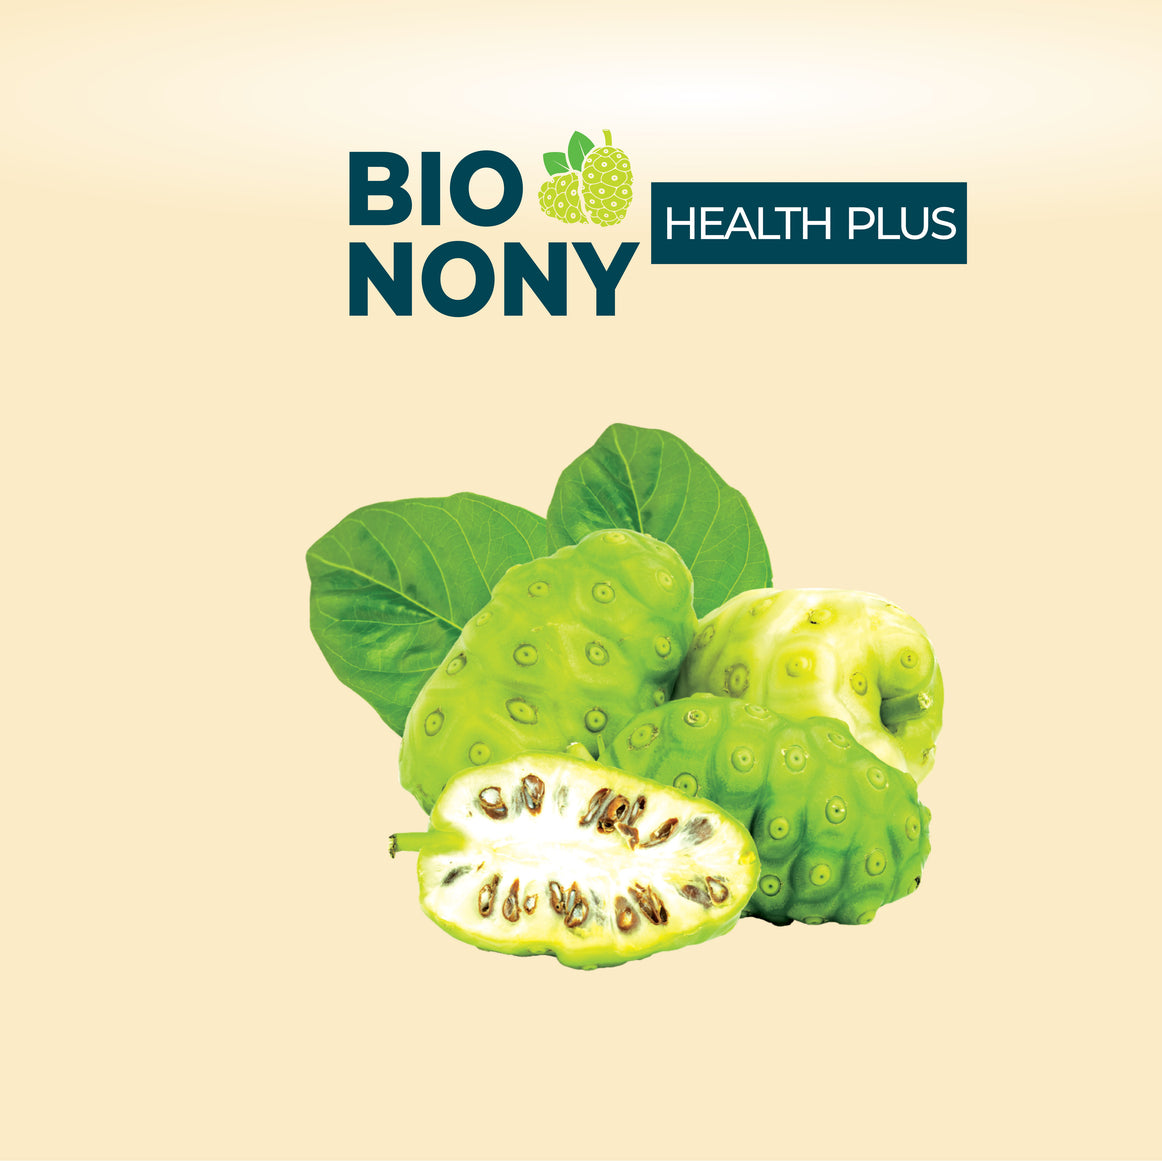 BIONONY HEALTH PLUS - Health Supplement and Immunity Booster